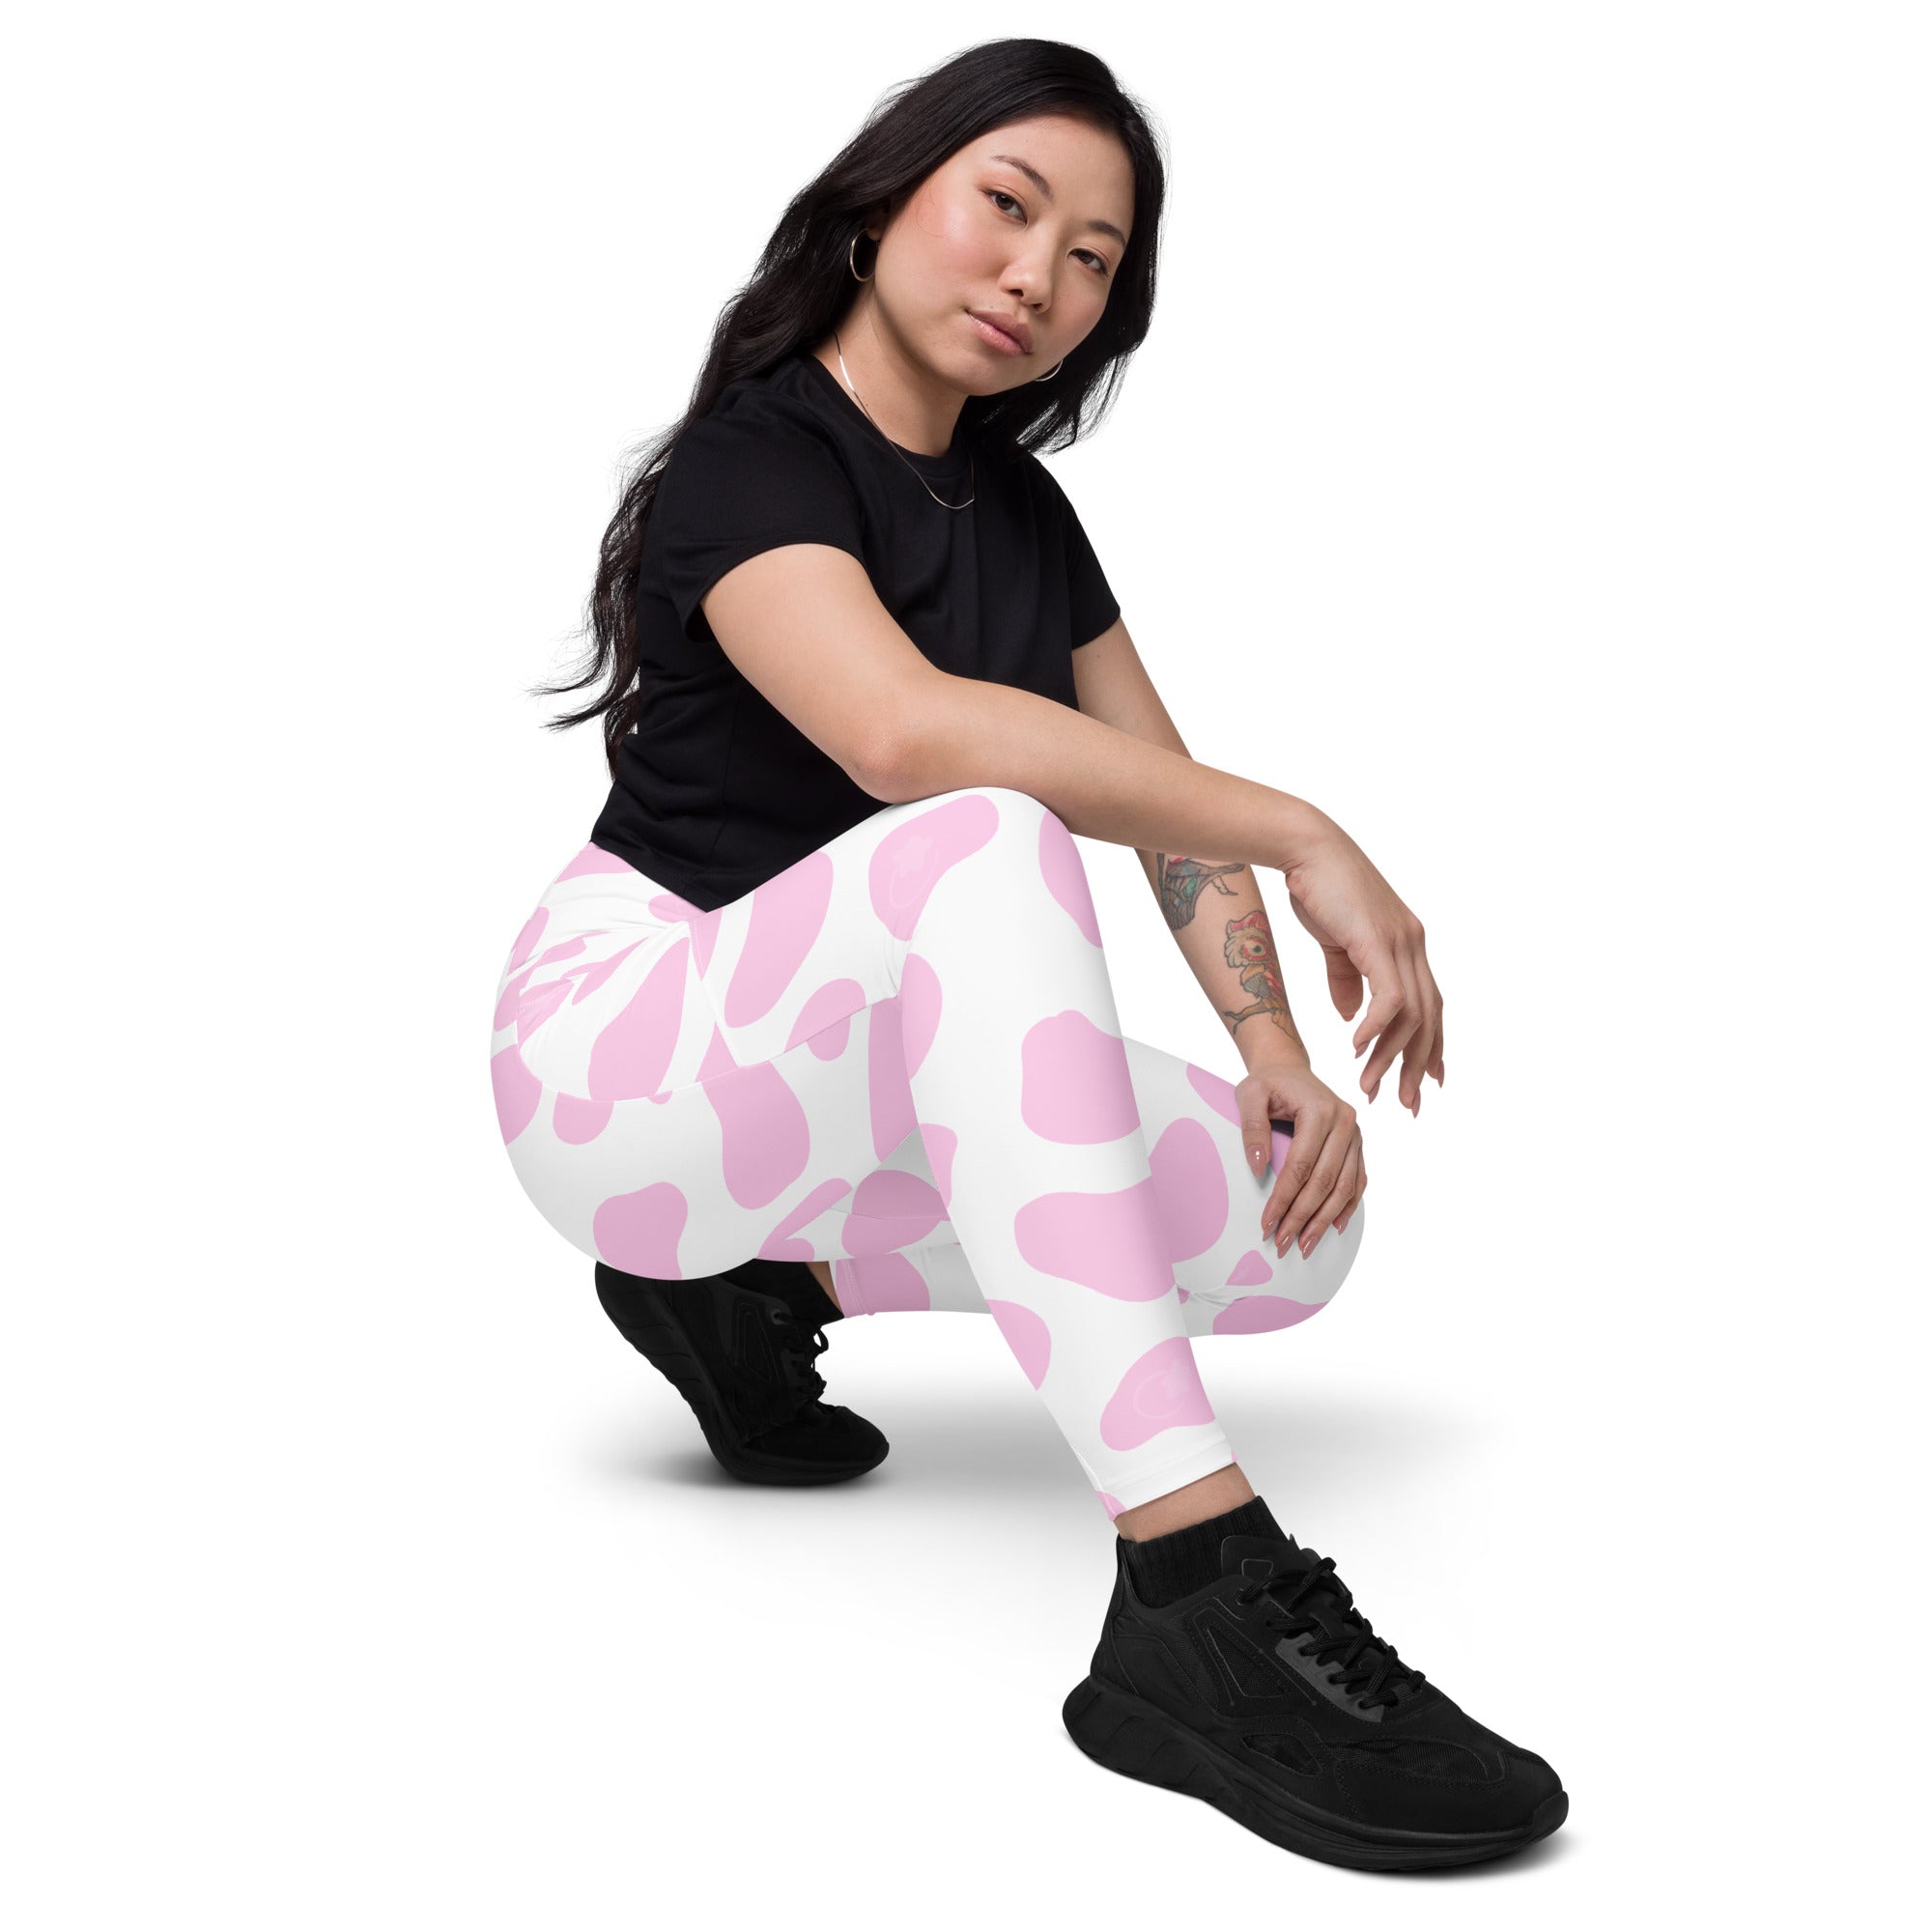 Pink Cow Leggings with pockets